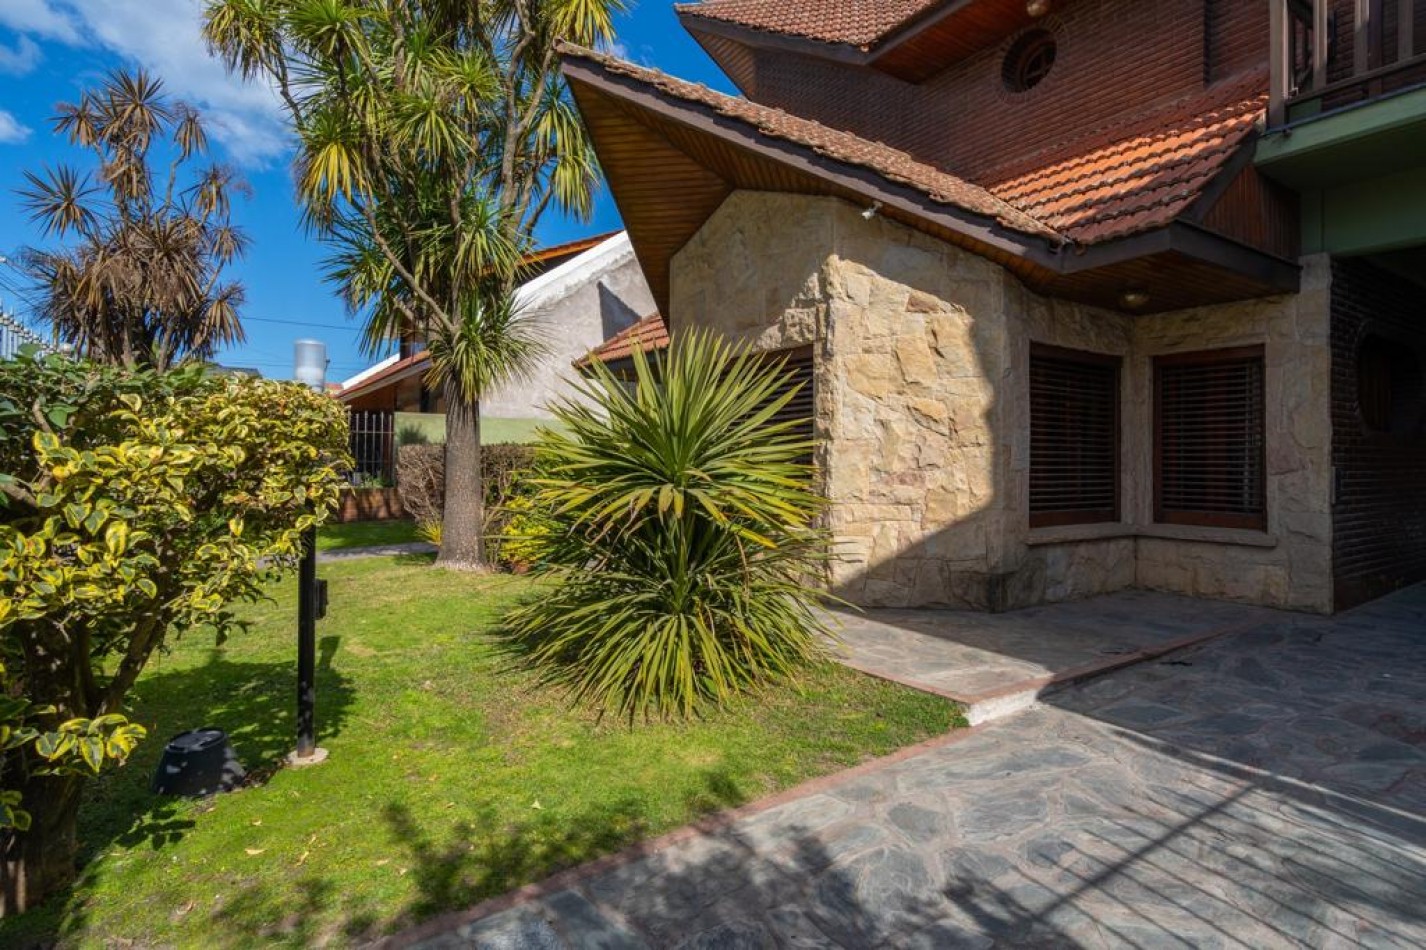 HERMOSO CHALET 4 AMB. CAISAMAR LOTE 649 M2